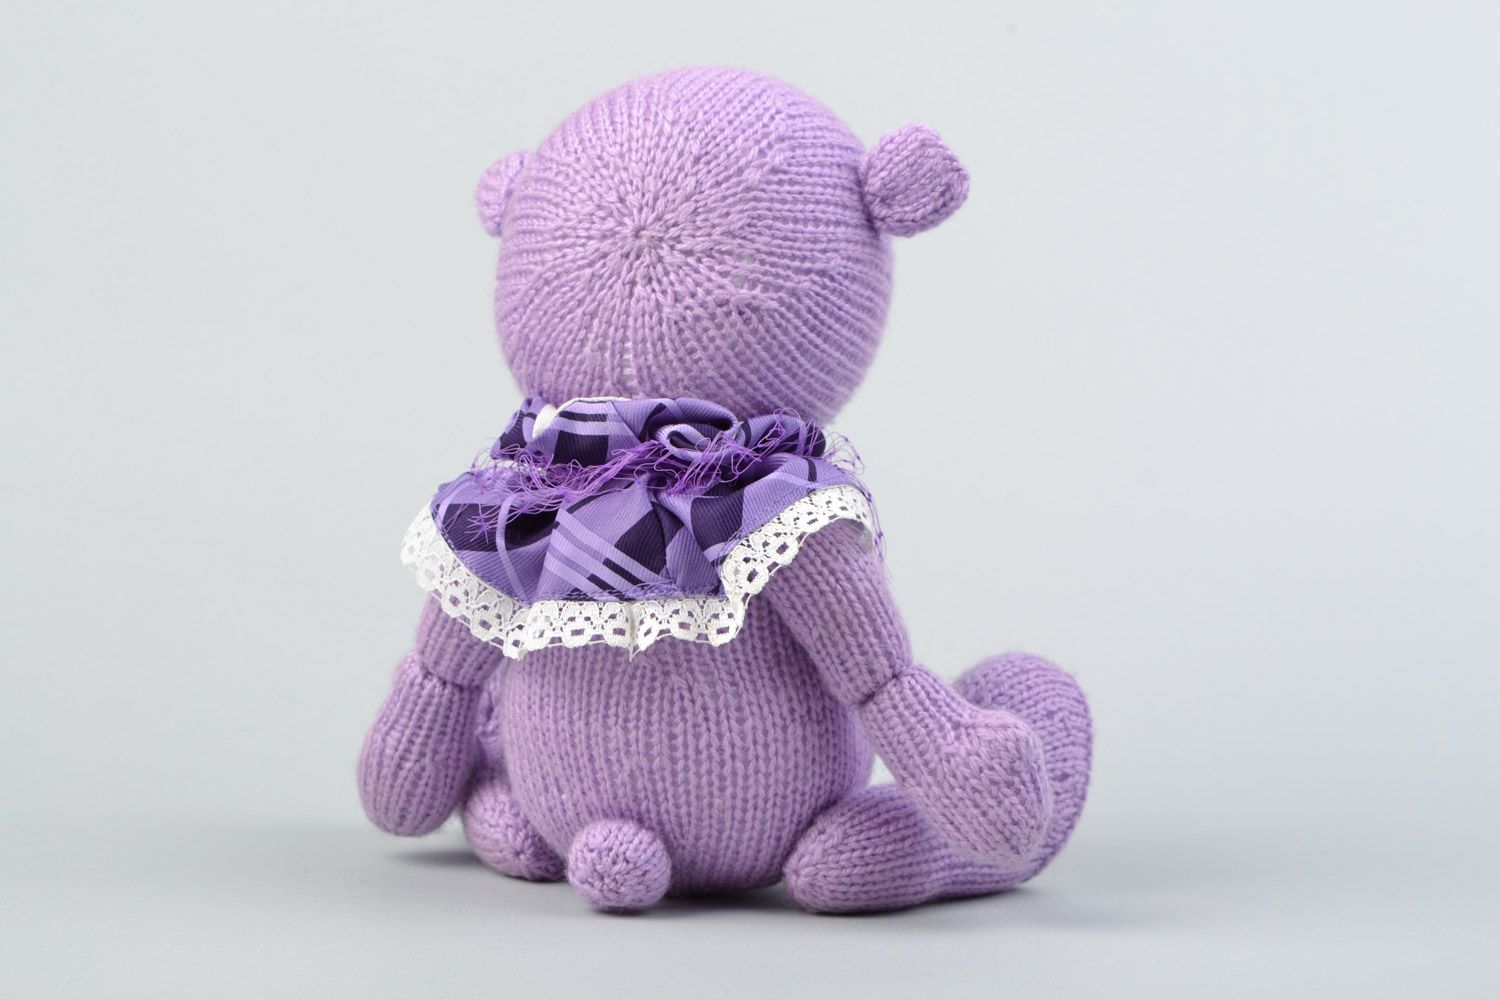 Handmade decorative crocheted purple bear toy with a bow for children photo 5